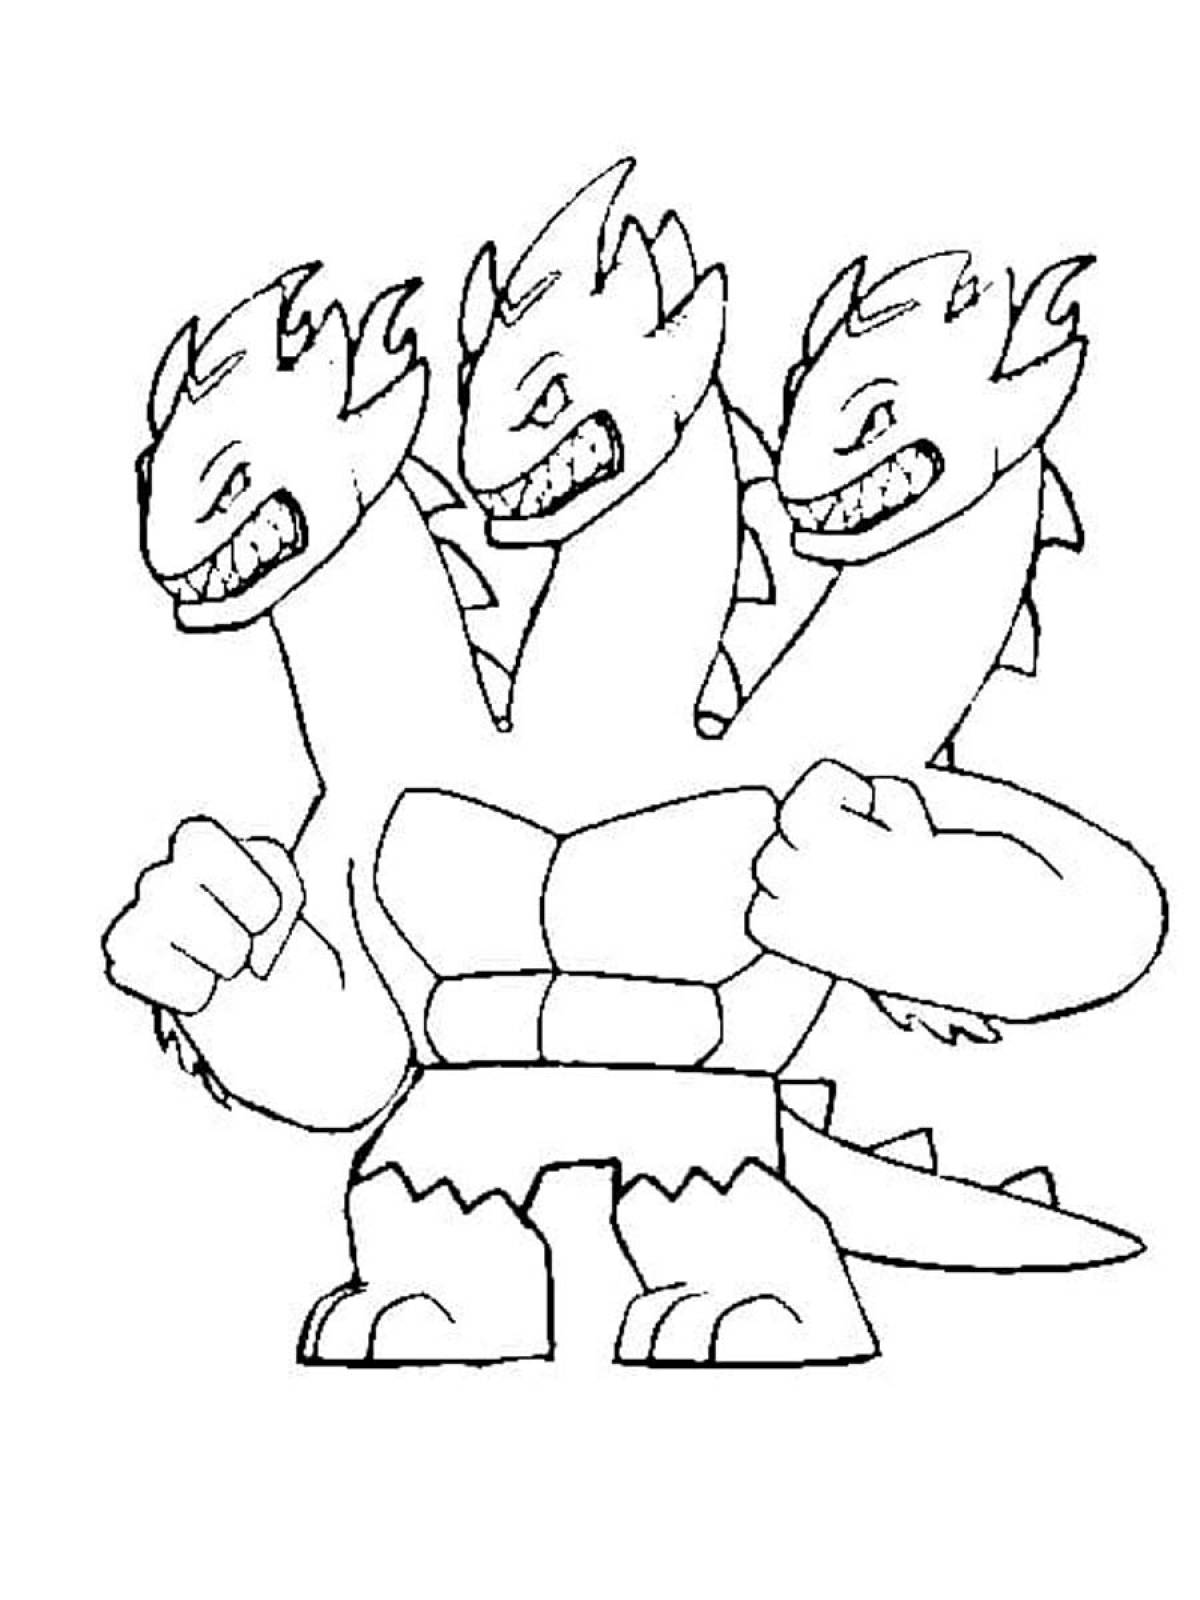 Coloring pages marvelous gujutsu heroes for kids